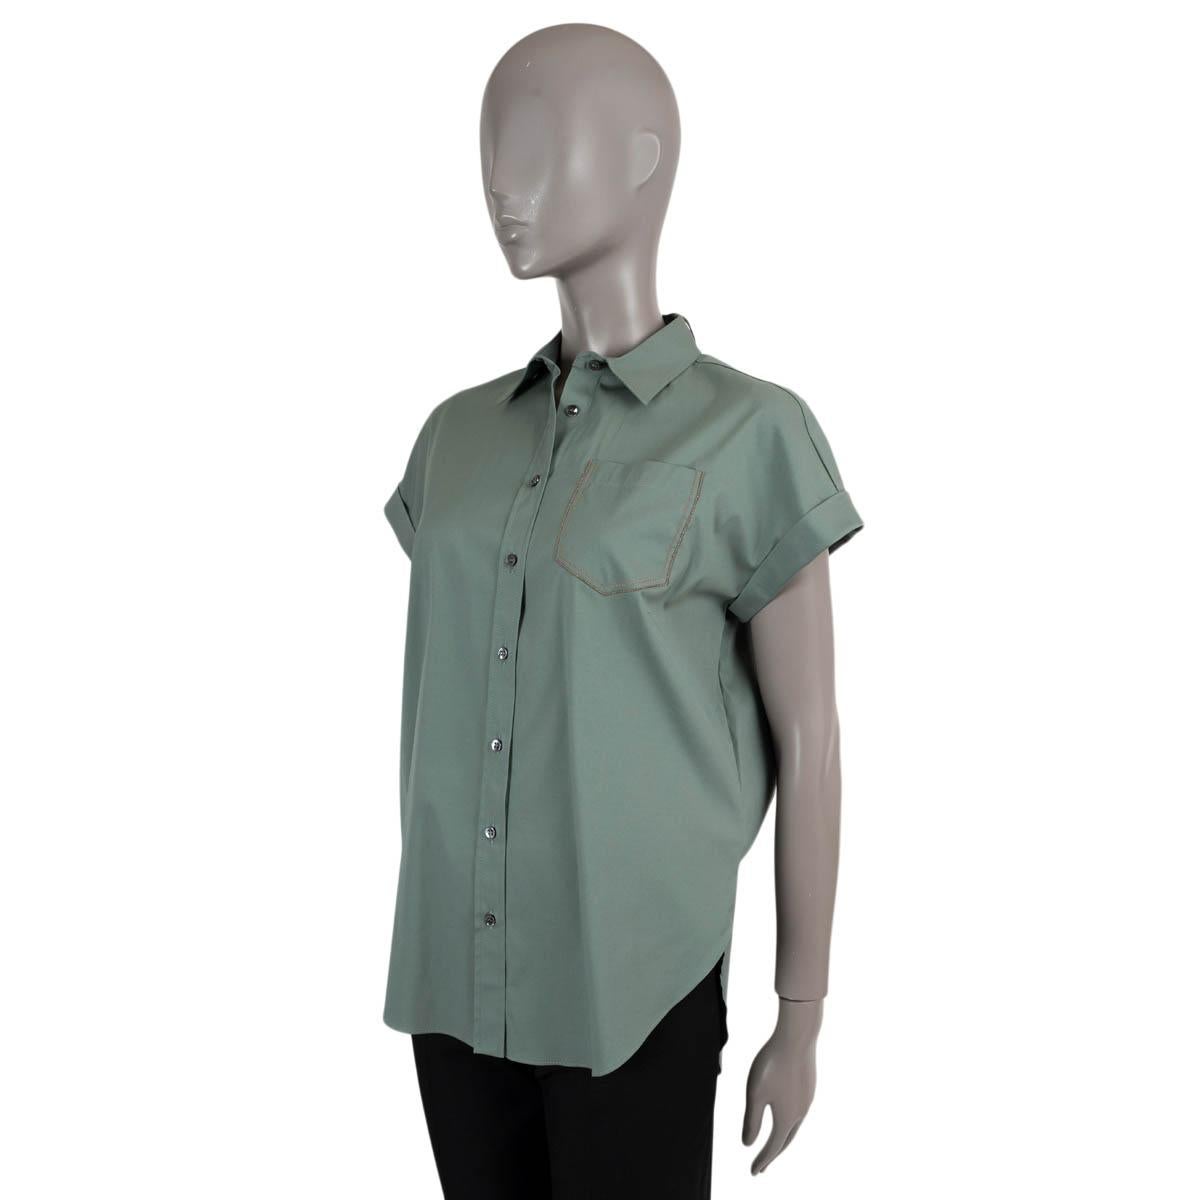 100% authentic Brunello Cucinelli poplin shirt in sage green cotton (72%), polyamide (23%) and elastane (5%). Features Monili trimmed open checst pocket and short raglan sleeves (sleeve measurement taken from the neck). New with